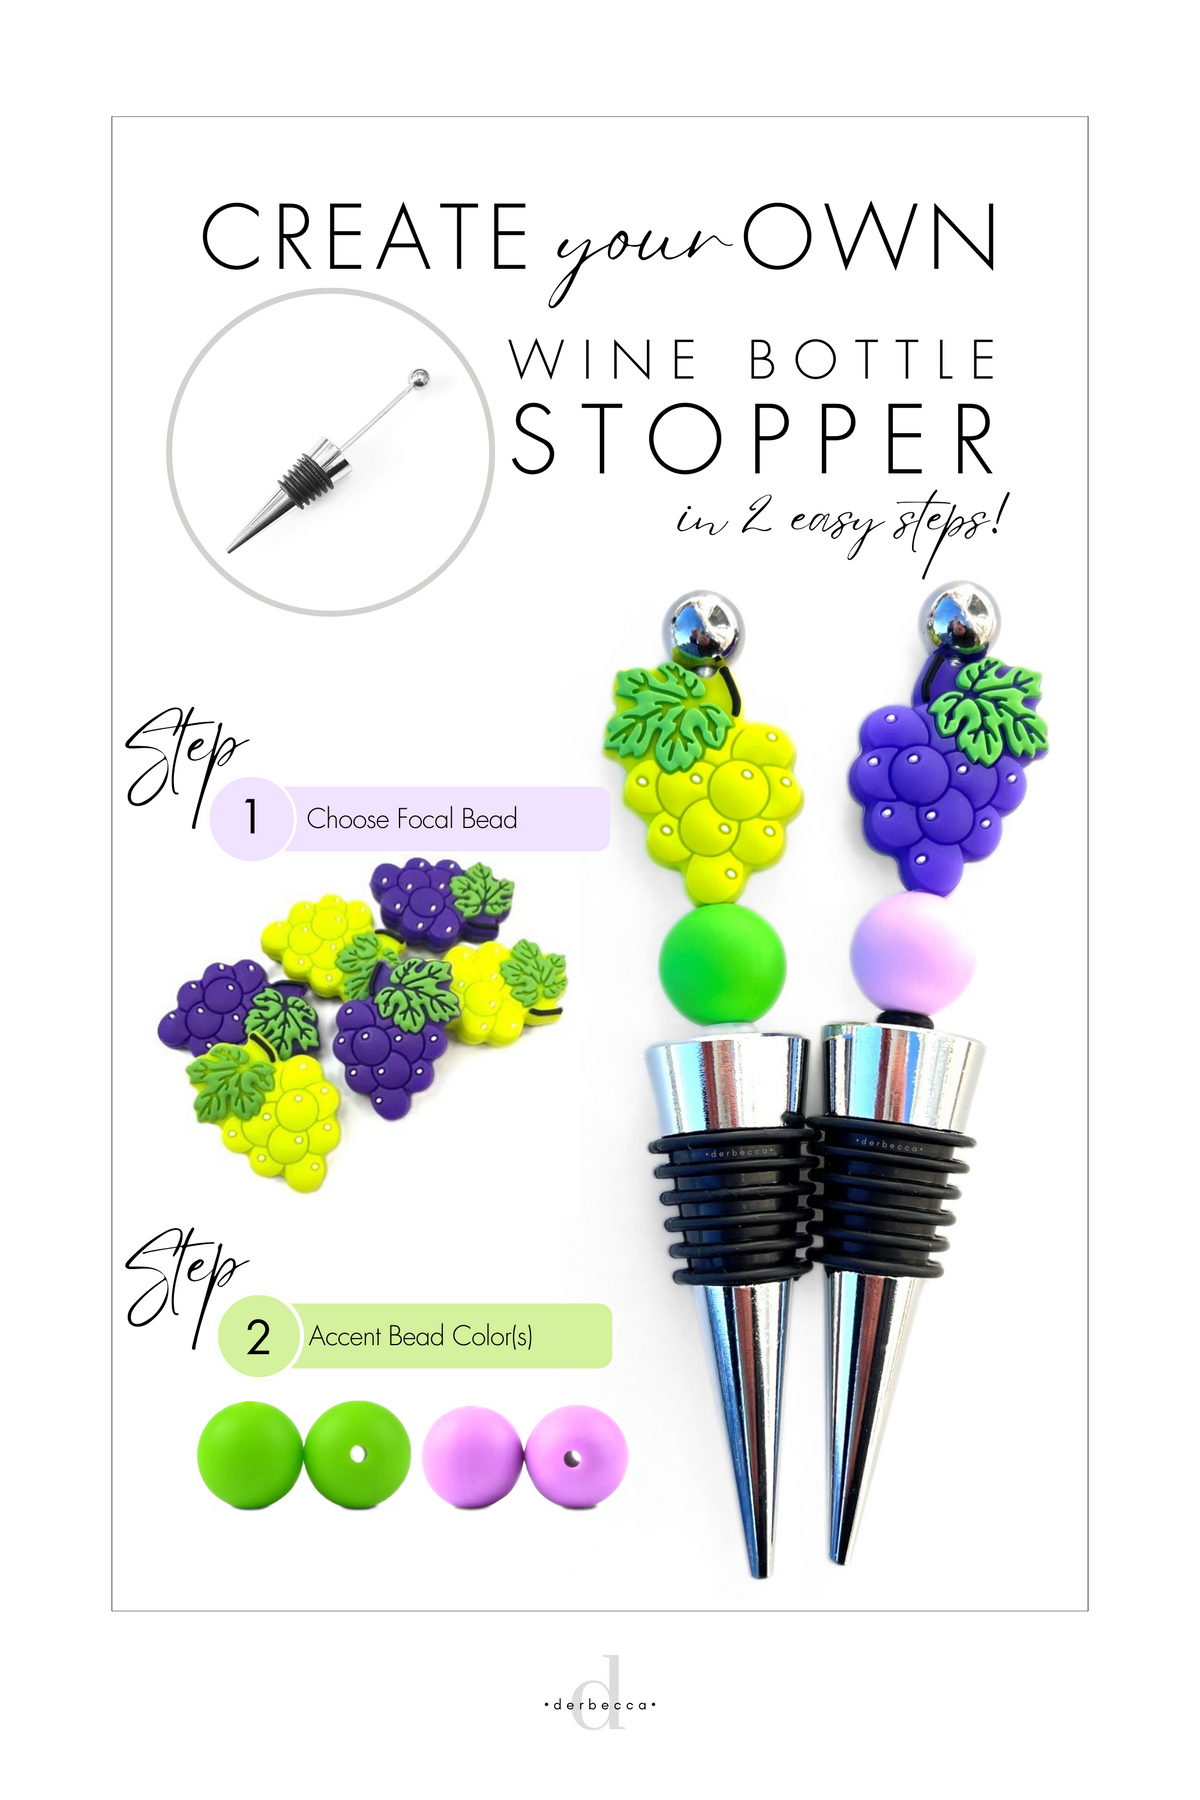 Create Your Own Wine Bottle Stopper personalized customized made to order with Silicone Focal and Accent or Spacer Beads 12mm & 15mm optional rhinestone spacers with a selection of silicone focal beads including cats, dogs, animals, characters, designer brands, sports, teams, occupations, disney, grapes, jeep, motorcyles, deadpool, stitch, winnie the pooh, hello kitty, floral daisy sunflowers, sushi, princess, military, snarky, eagles, flyers, and more.